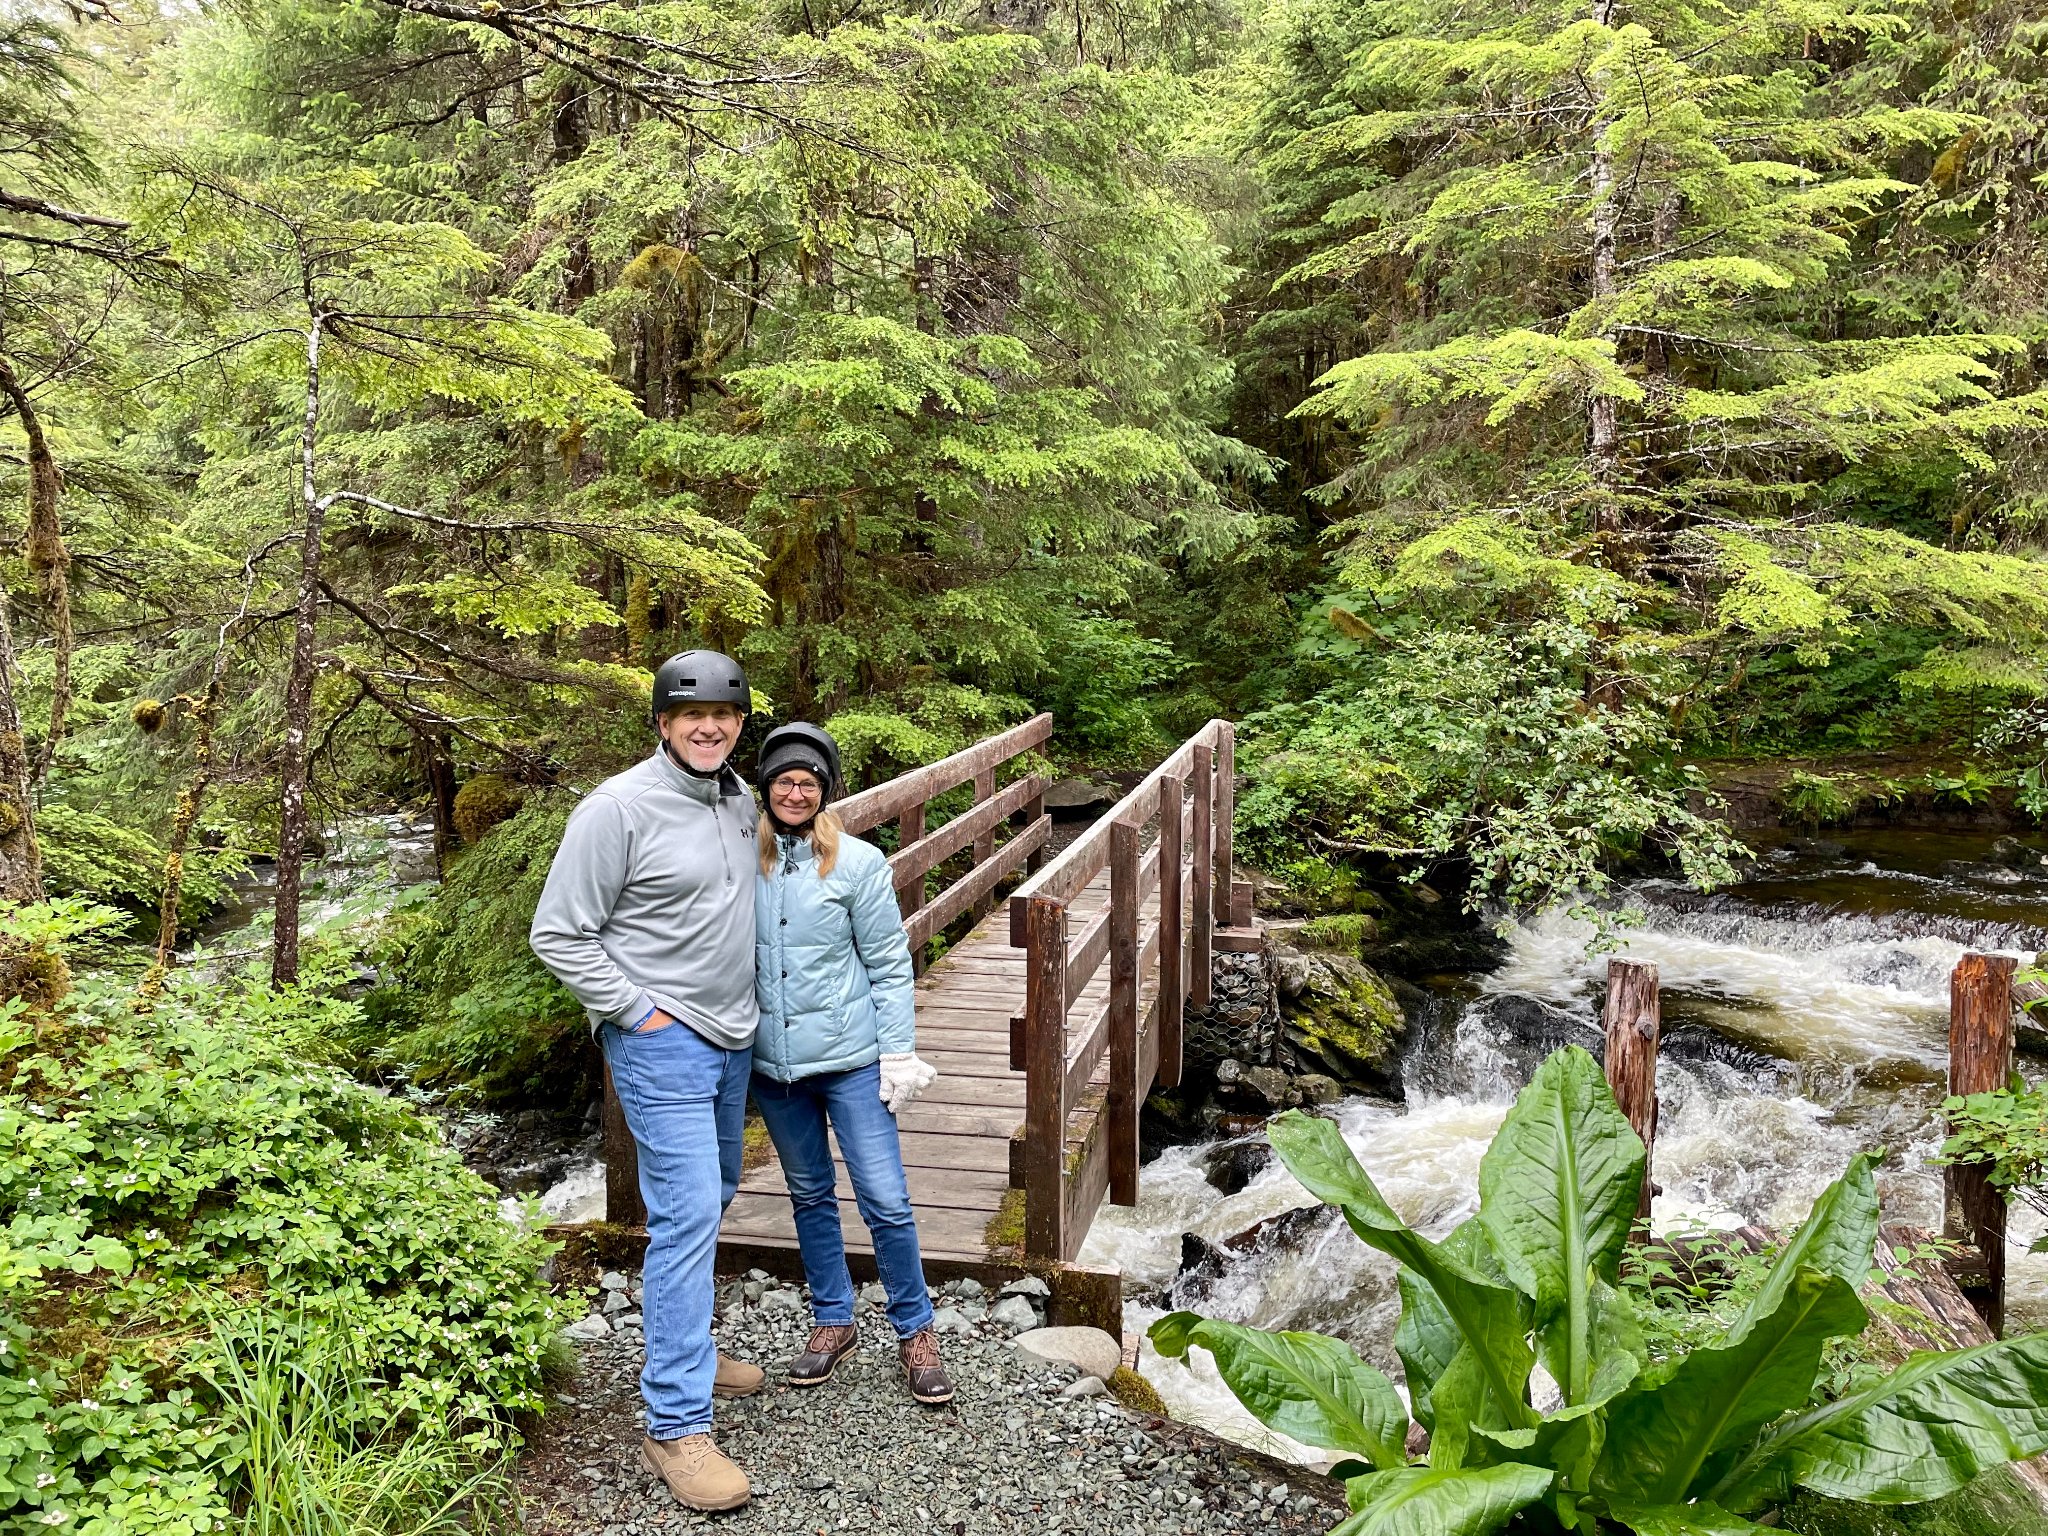 A couple standing together with a small wooden bridge, river and tall trees in the background.